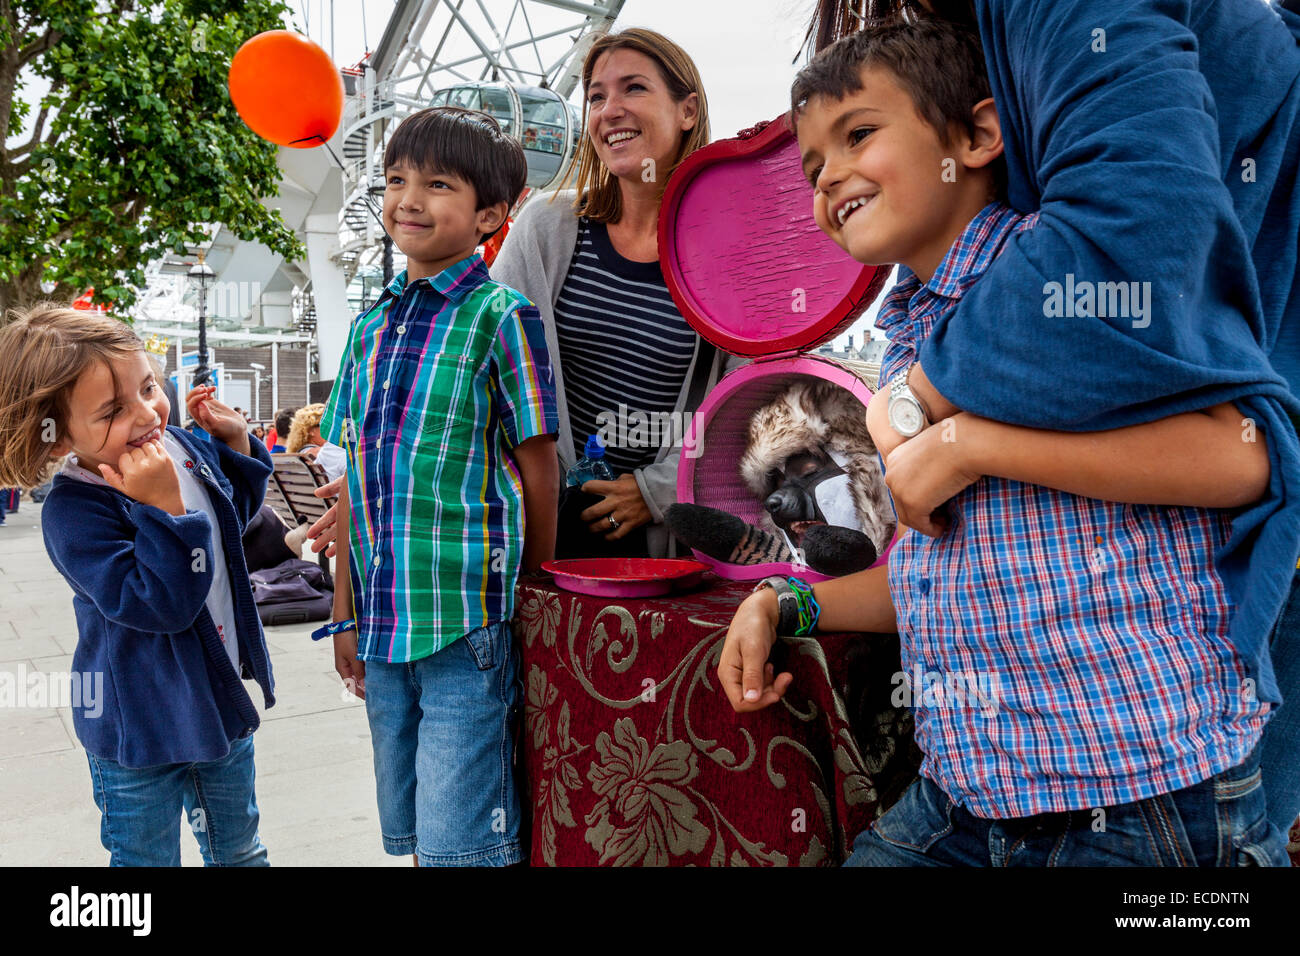 A Family Poses With A Street Entertainer At The South Bank, London, England Stock Photo